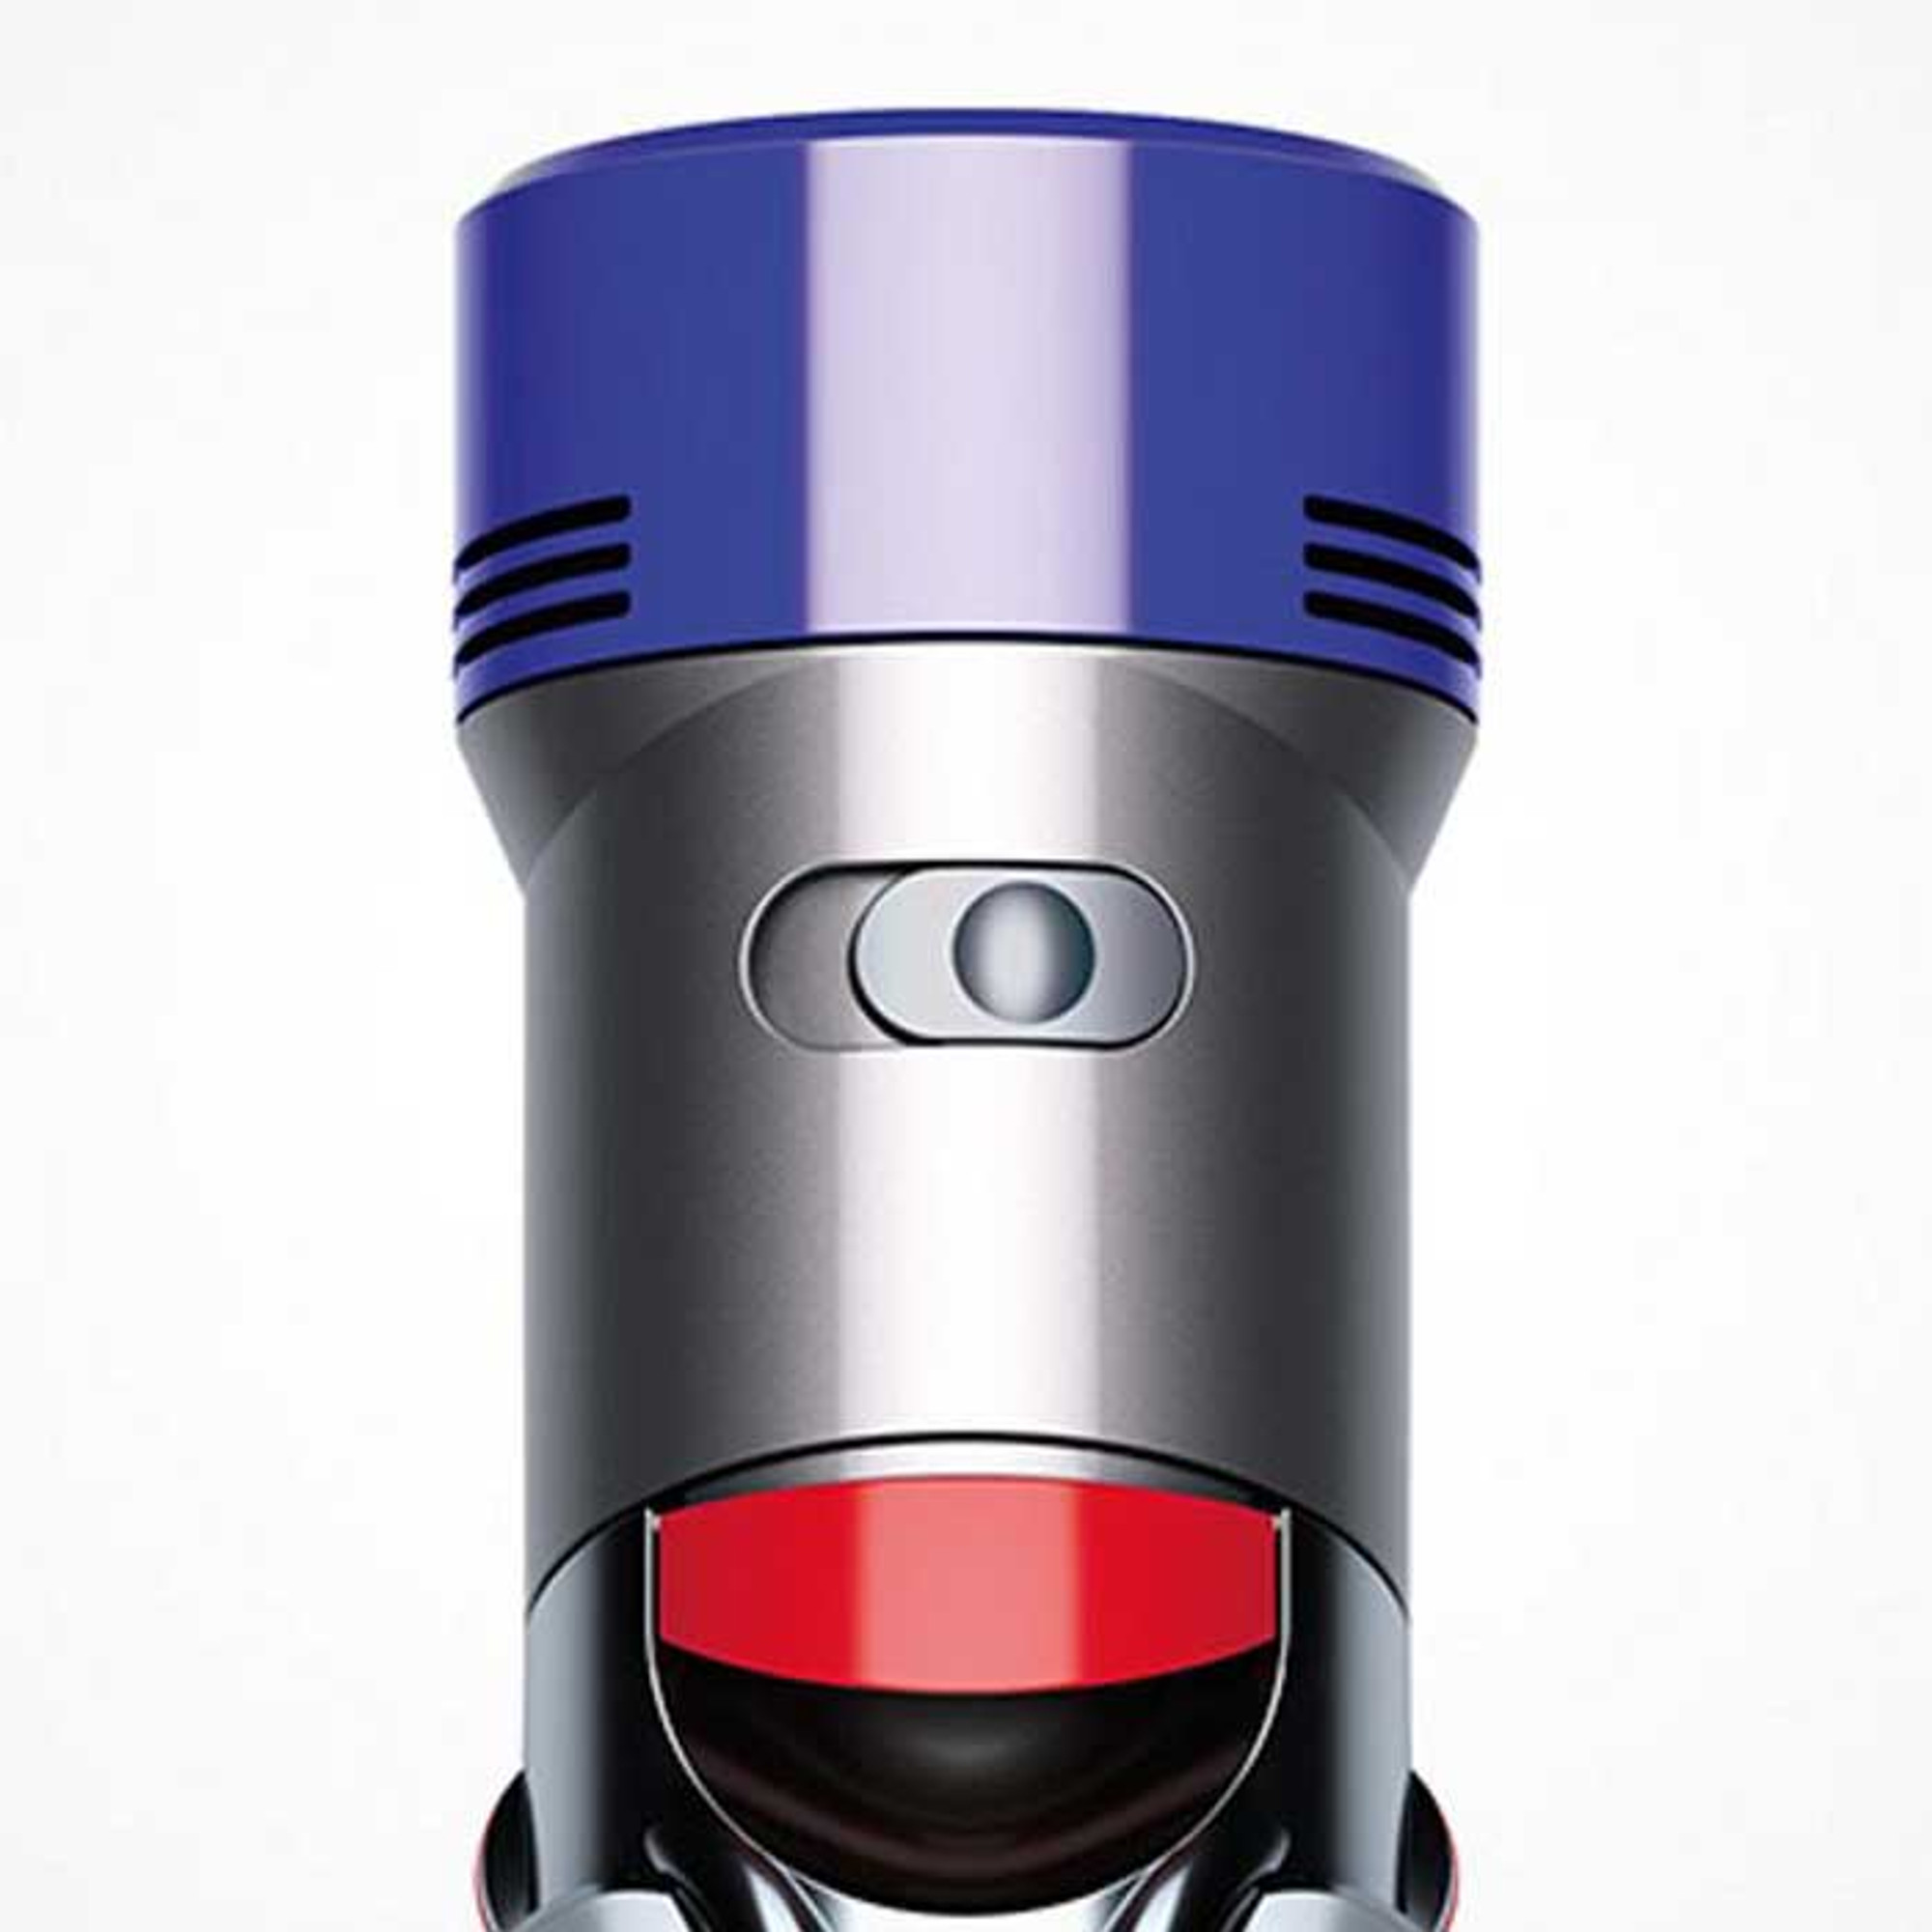 How to Change Filters for Dyson V7 & V8 Absolute and Animal